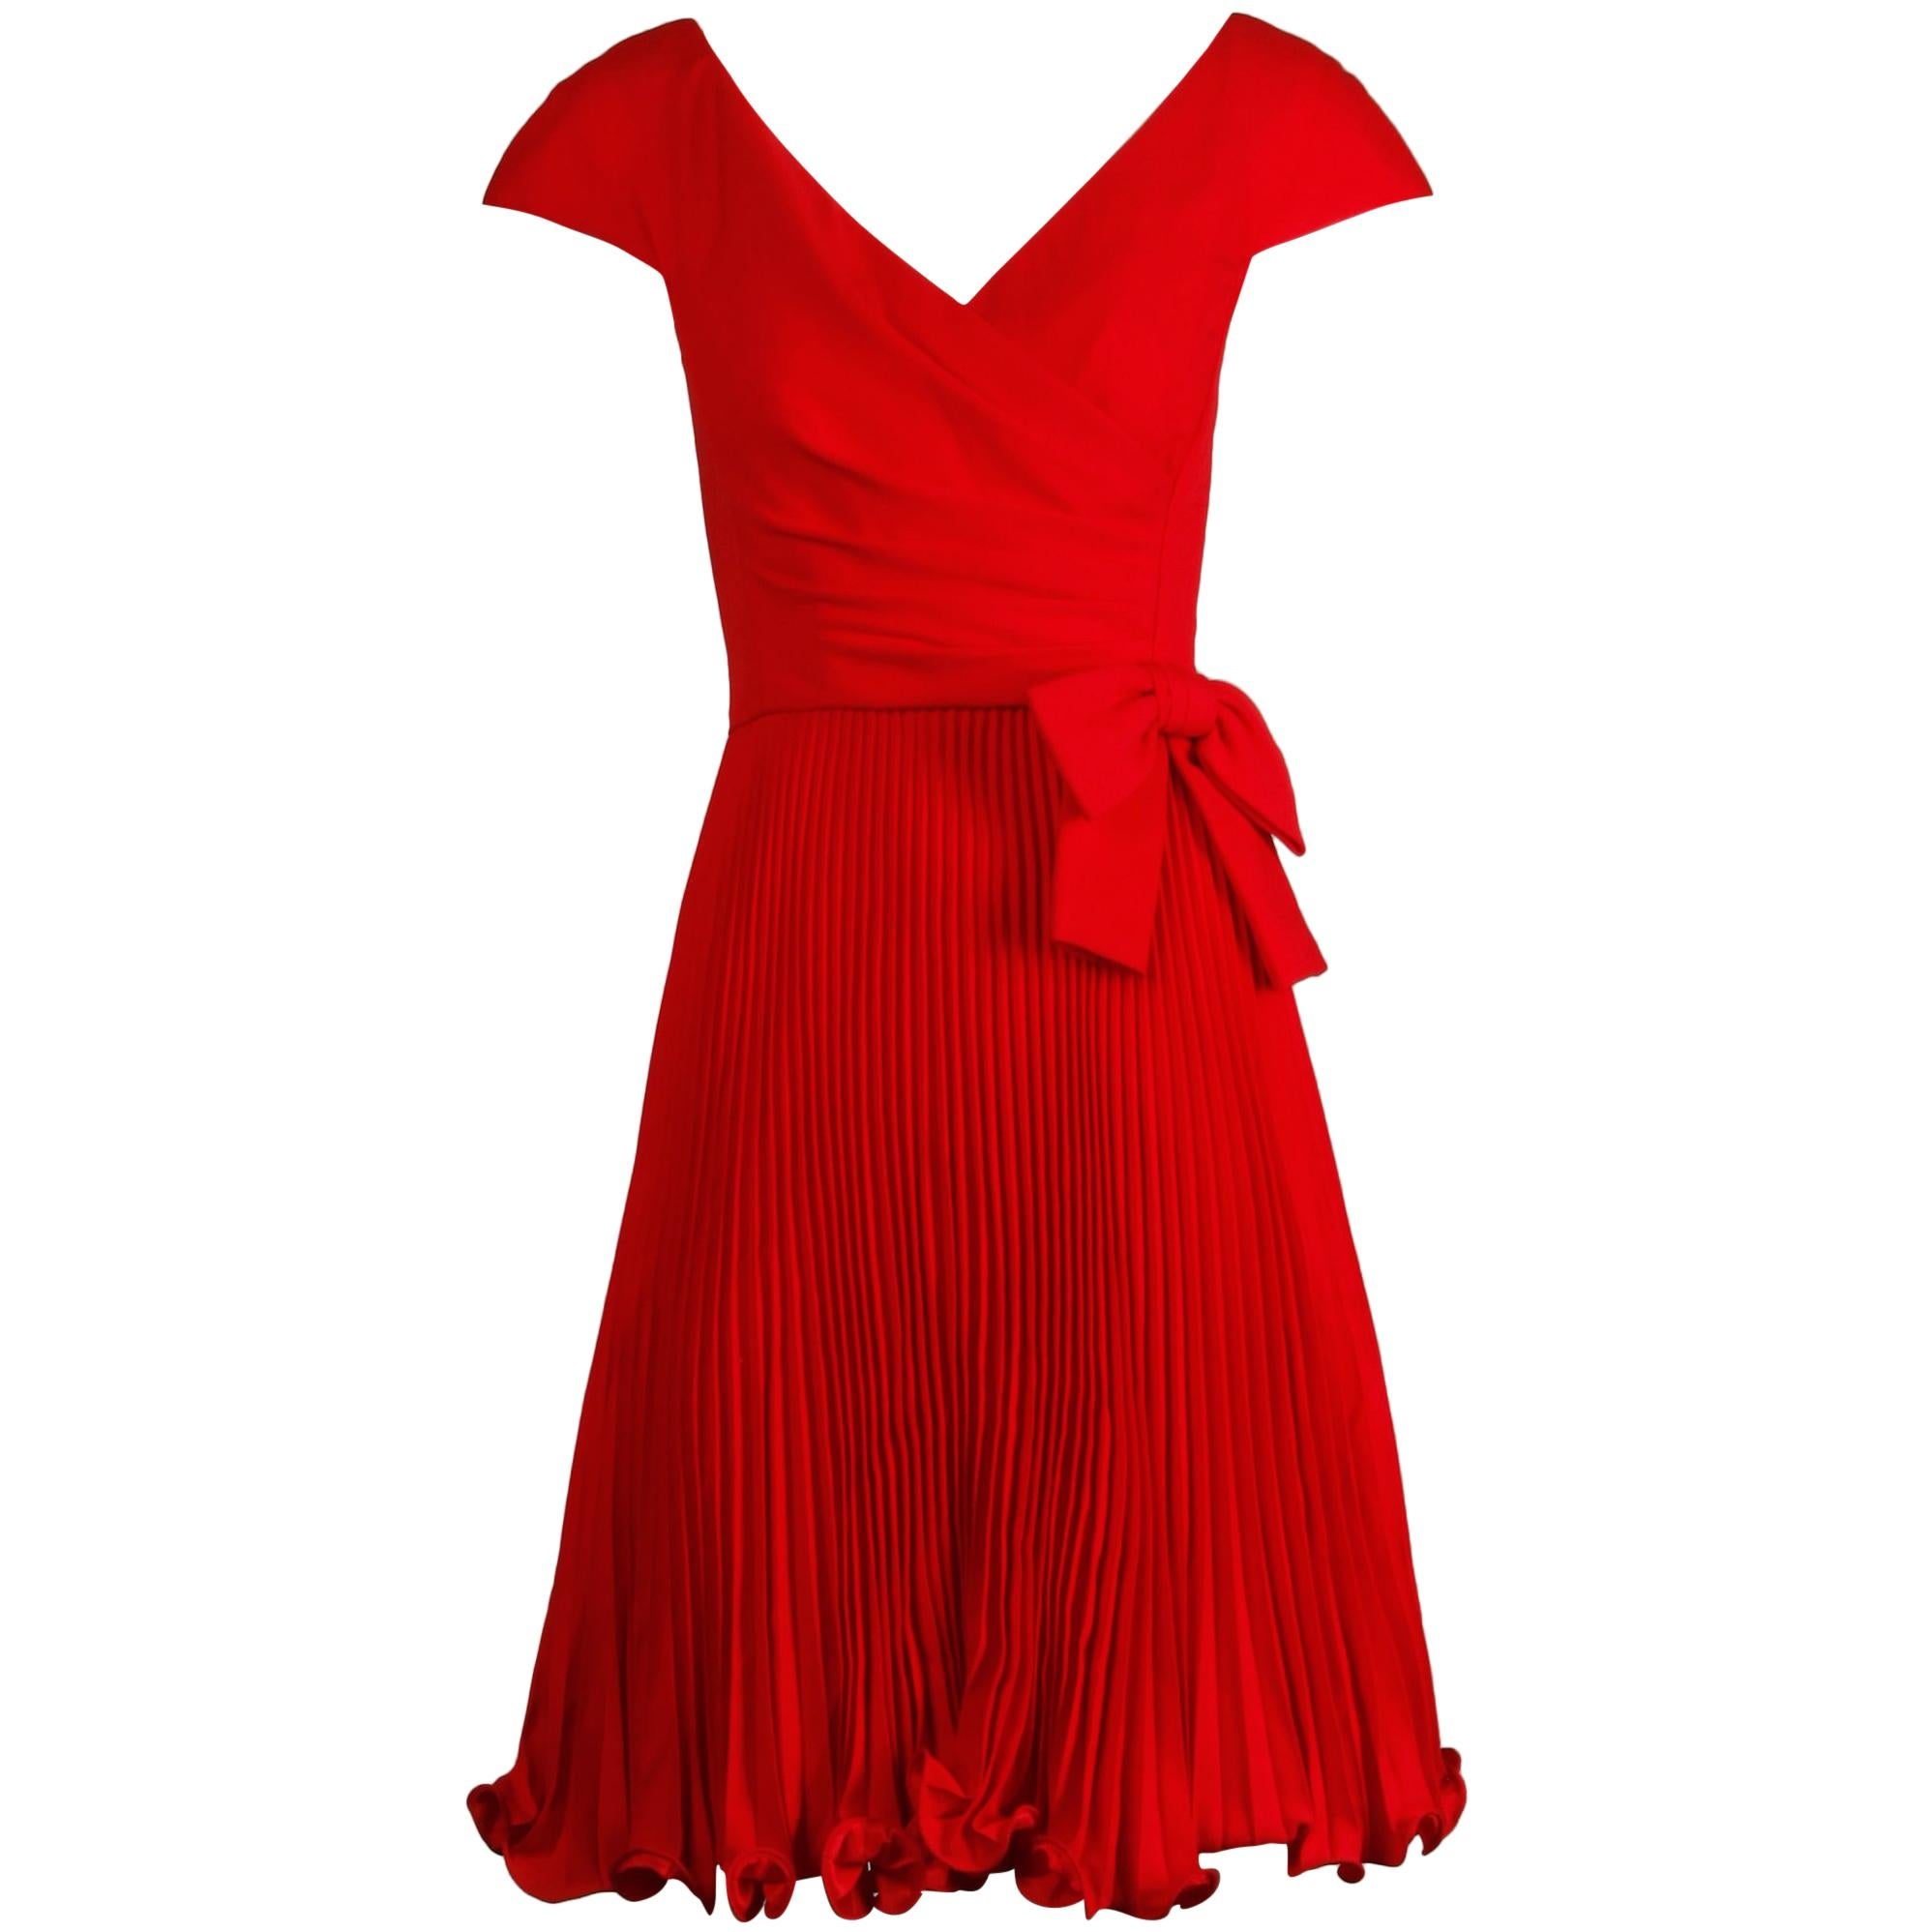 1990s Arnold Scaasi Vintage Red Accordian Pleated Cocktail Dress with Bow Detail